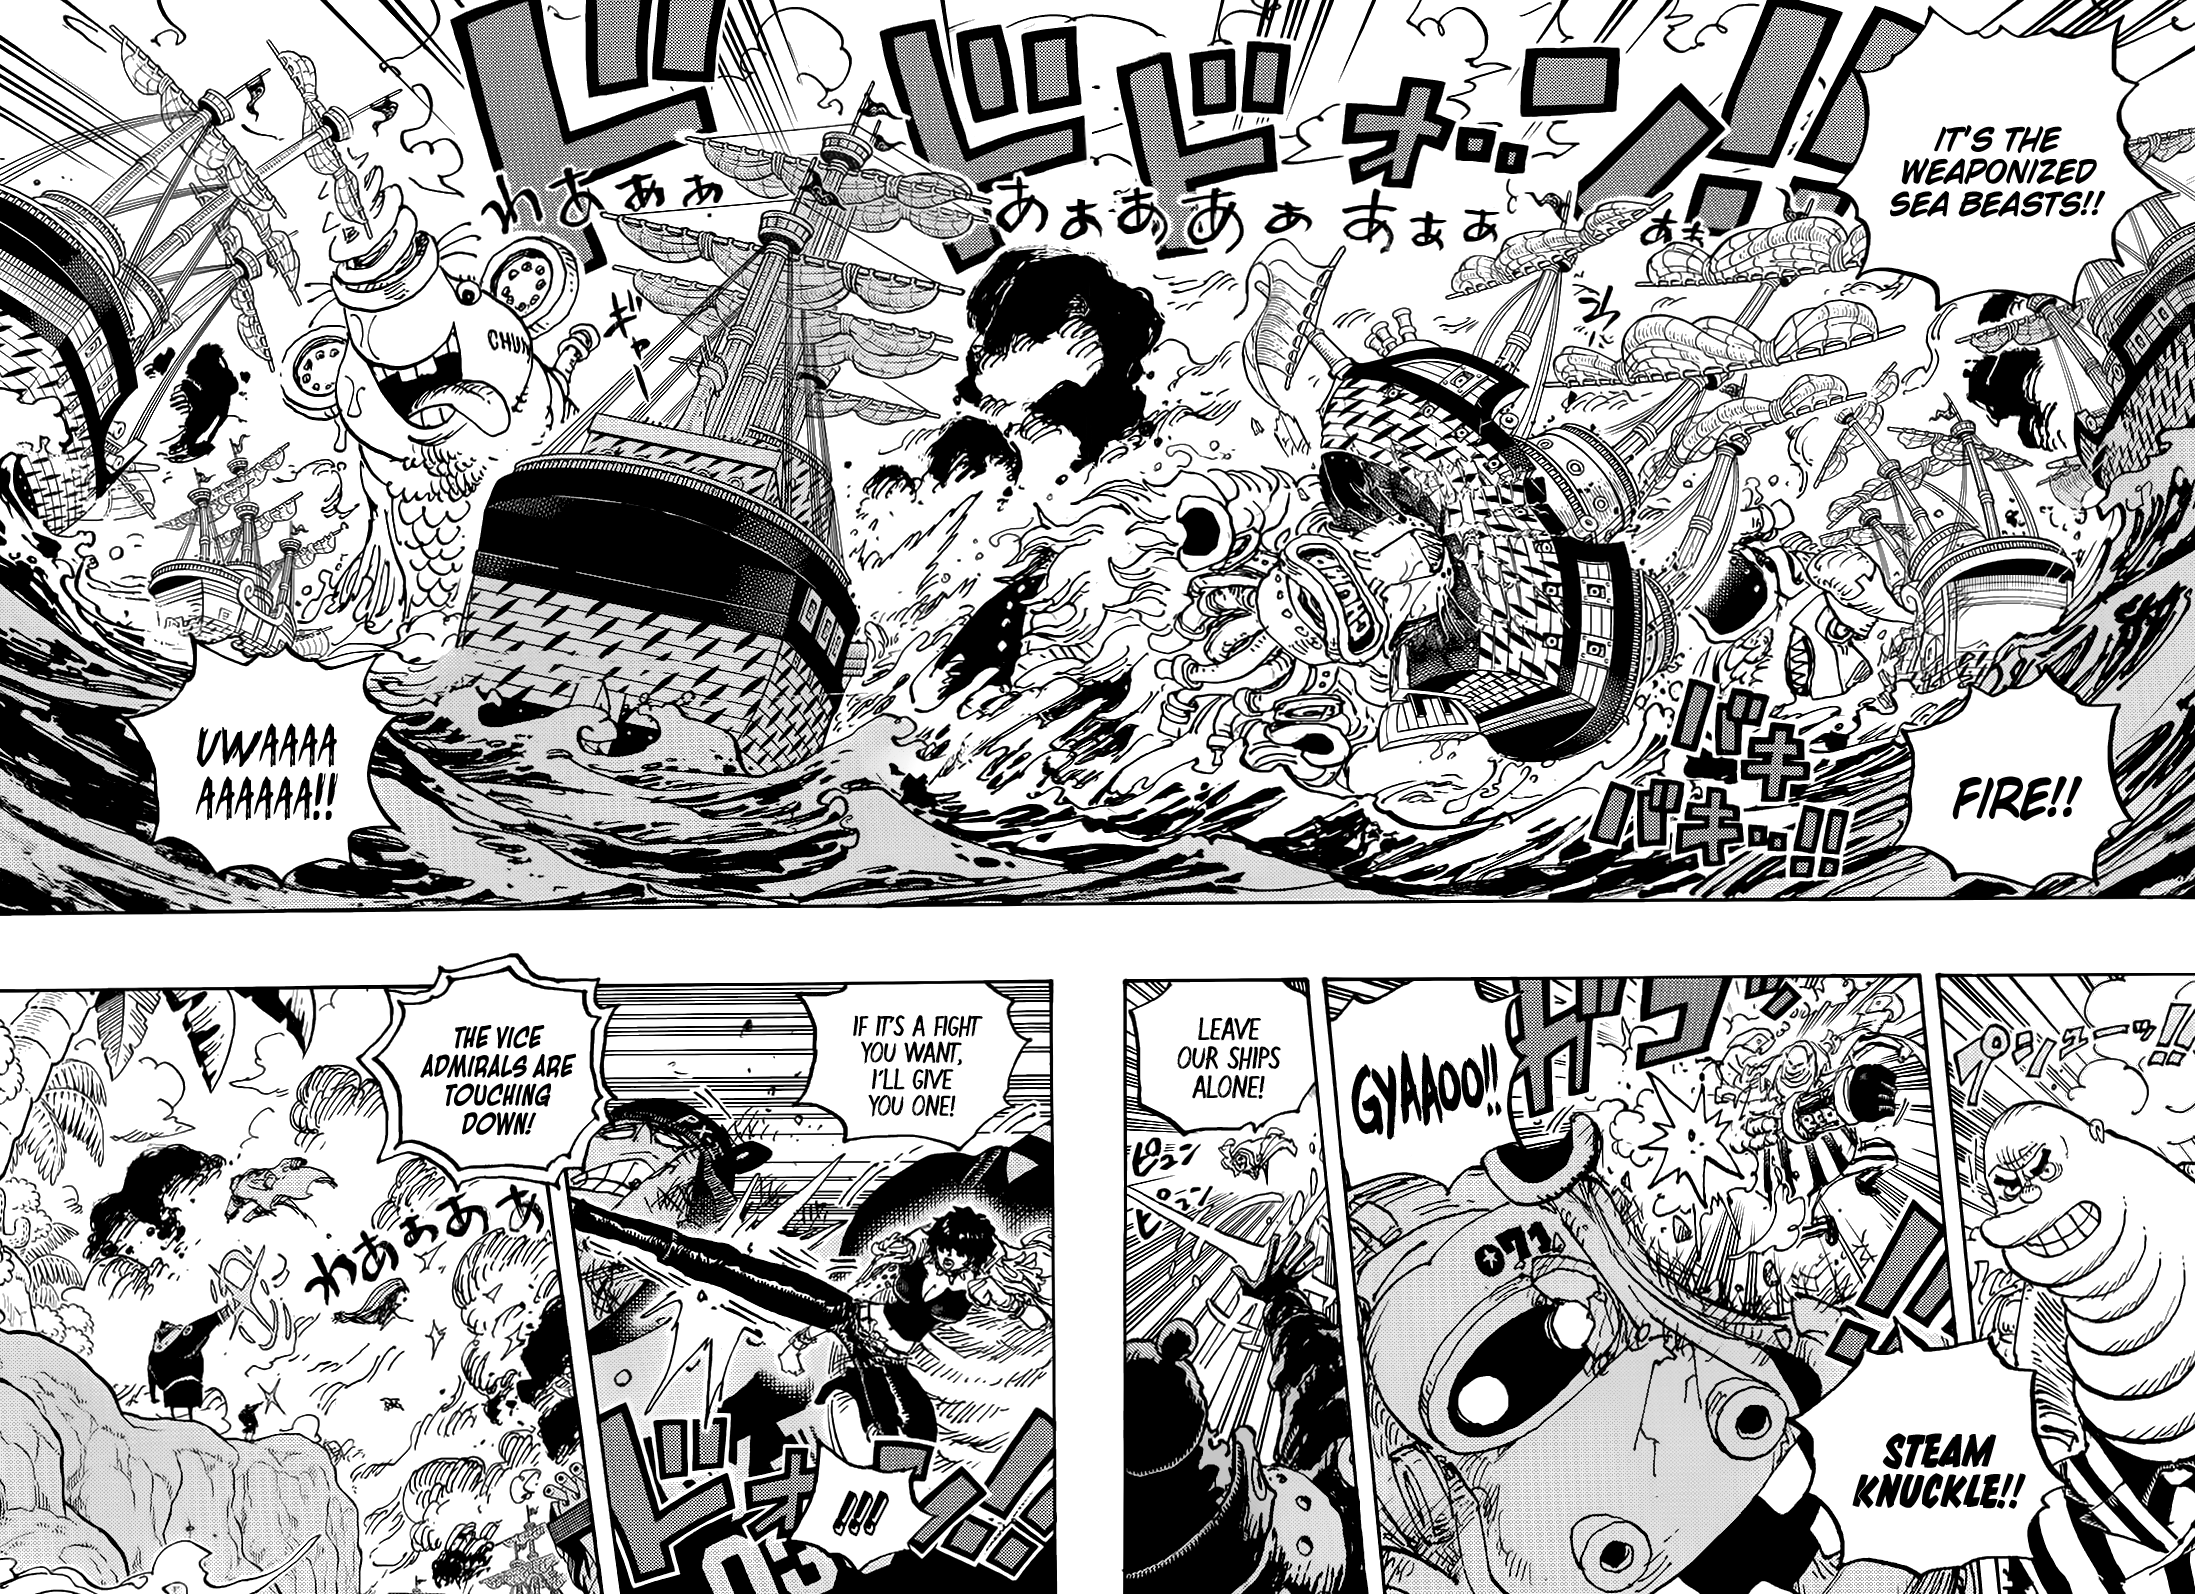 One Piece, Chapter 1088  TcbScans Org - Free Manga Online in High Quality